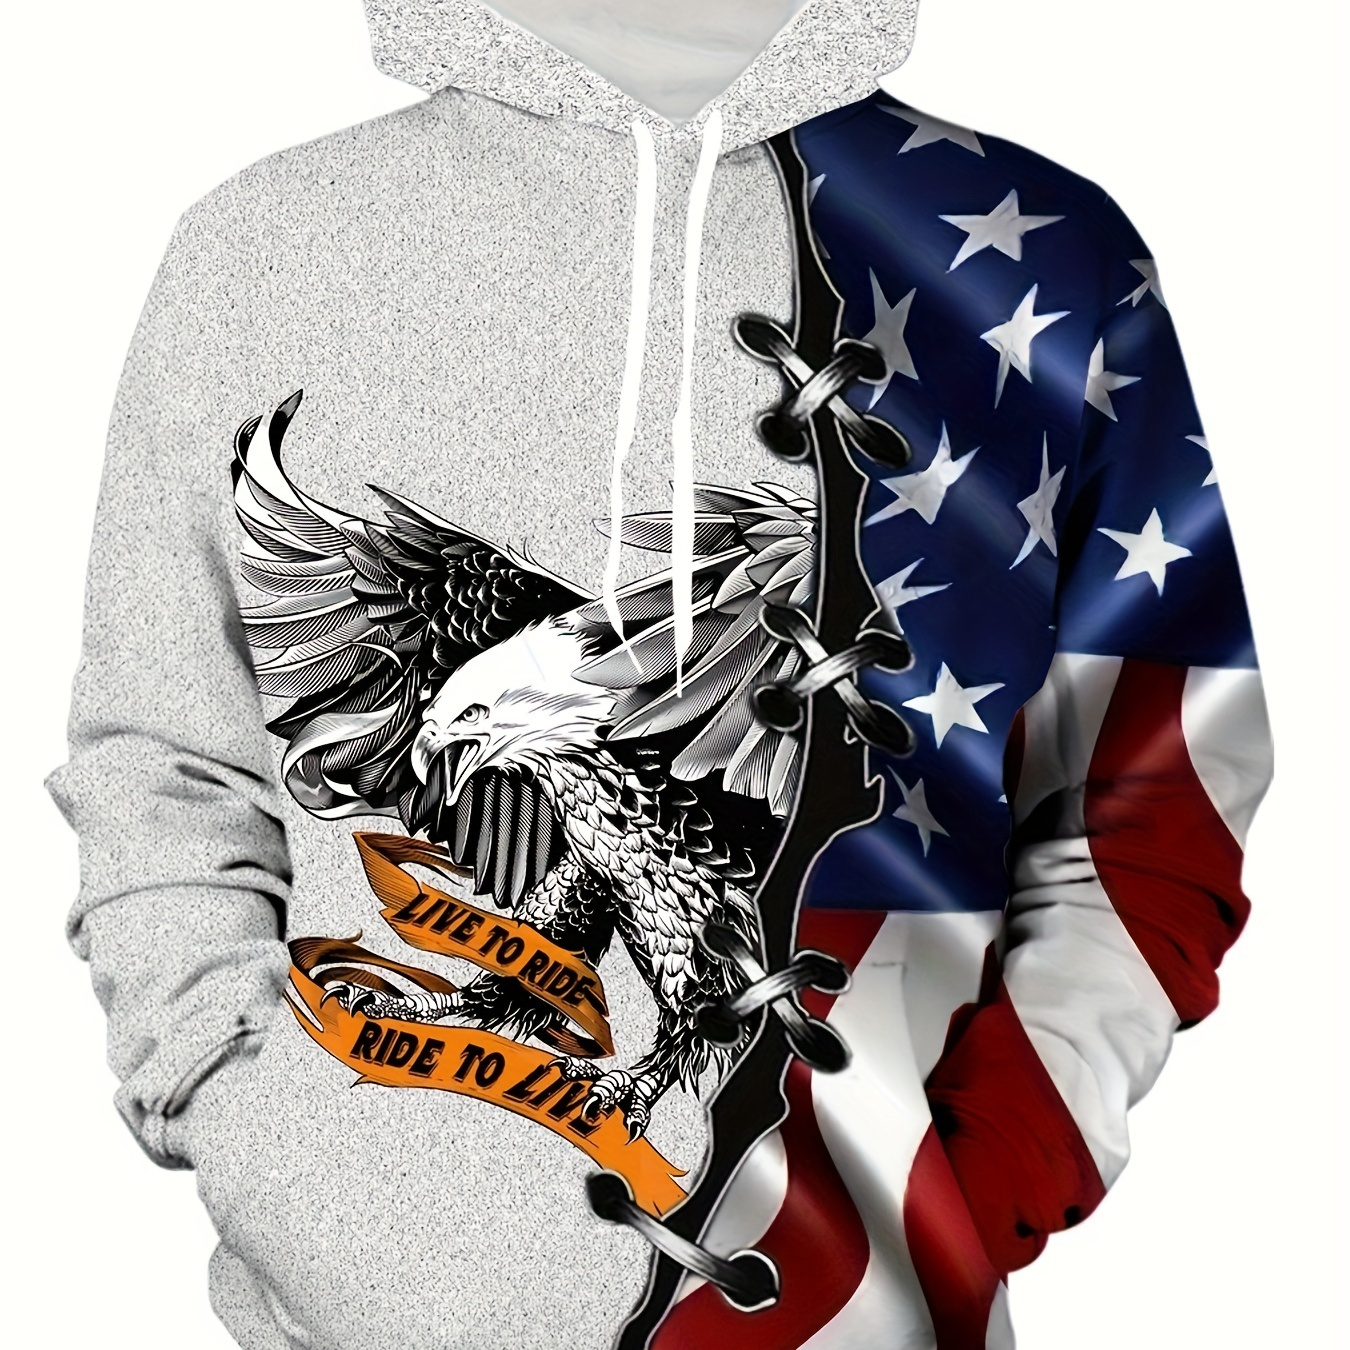 

Eagle & Flag Pattern Print Hoodie, Cool Hoodies For Men, Men's Casual Graphic Design Pullover Hooded Sweatshirt With Kangaroo Pocket Streetwear For Winter Fall, As Gifts